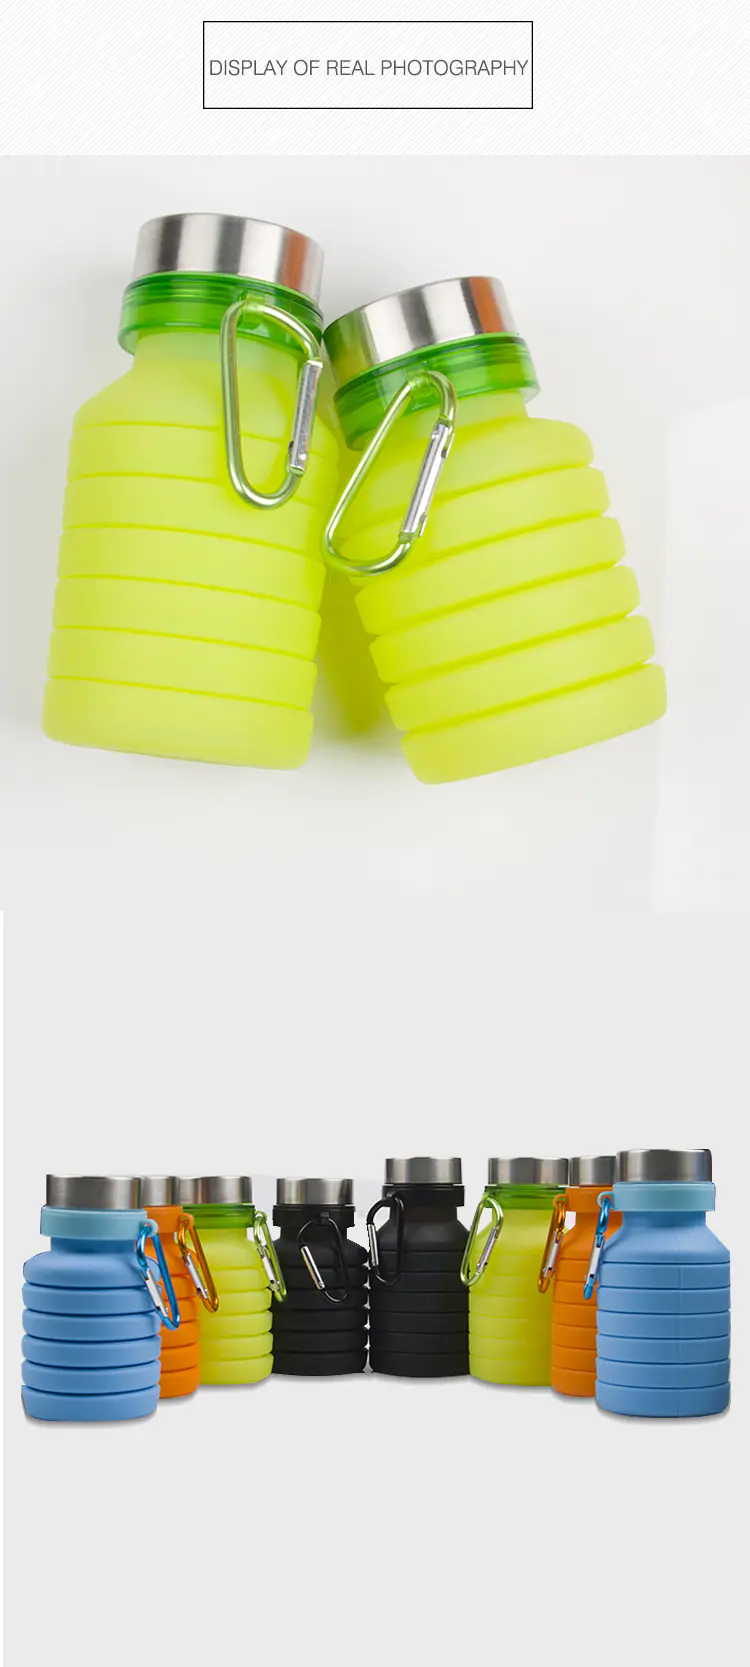 Mitour Silicone Products Wholesale green glass water bottle supplier for children